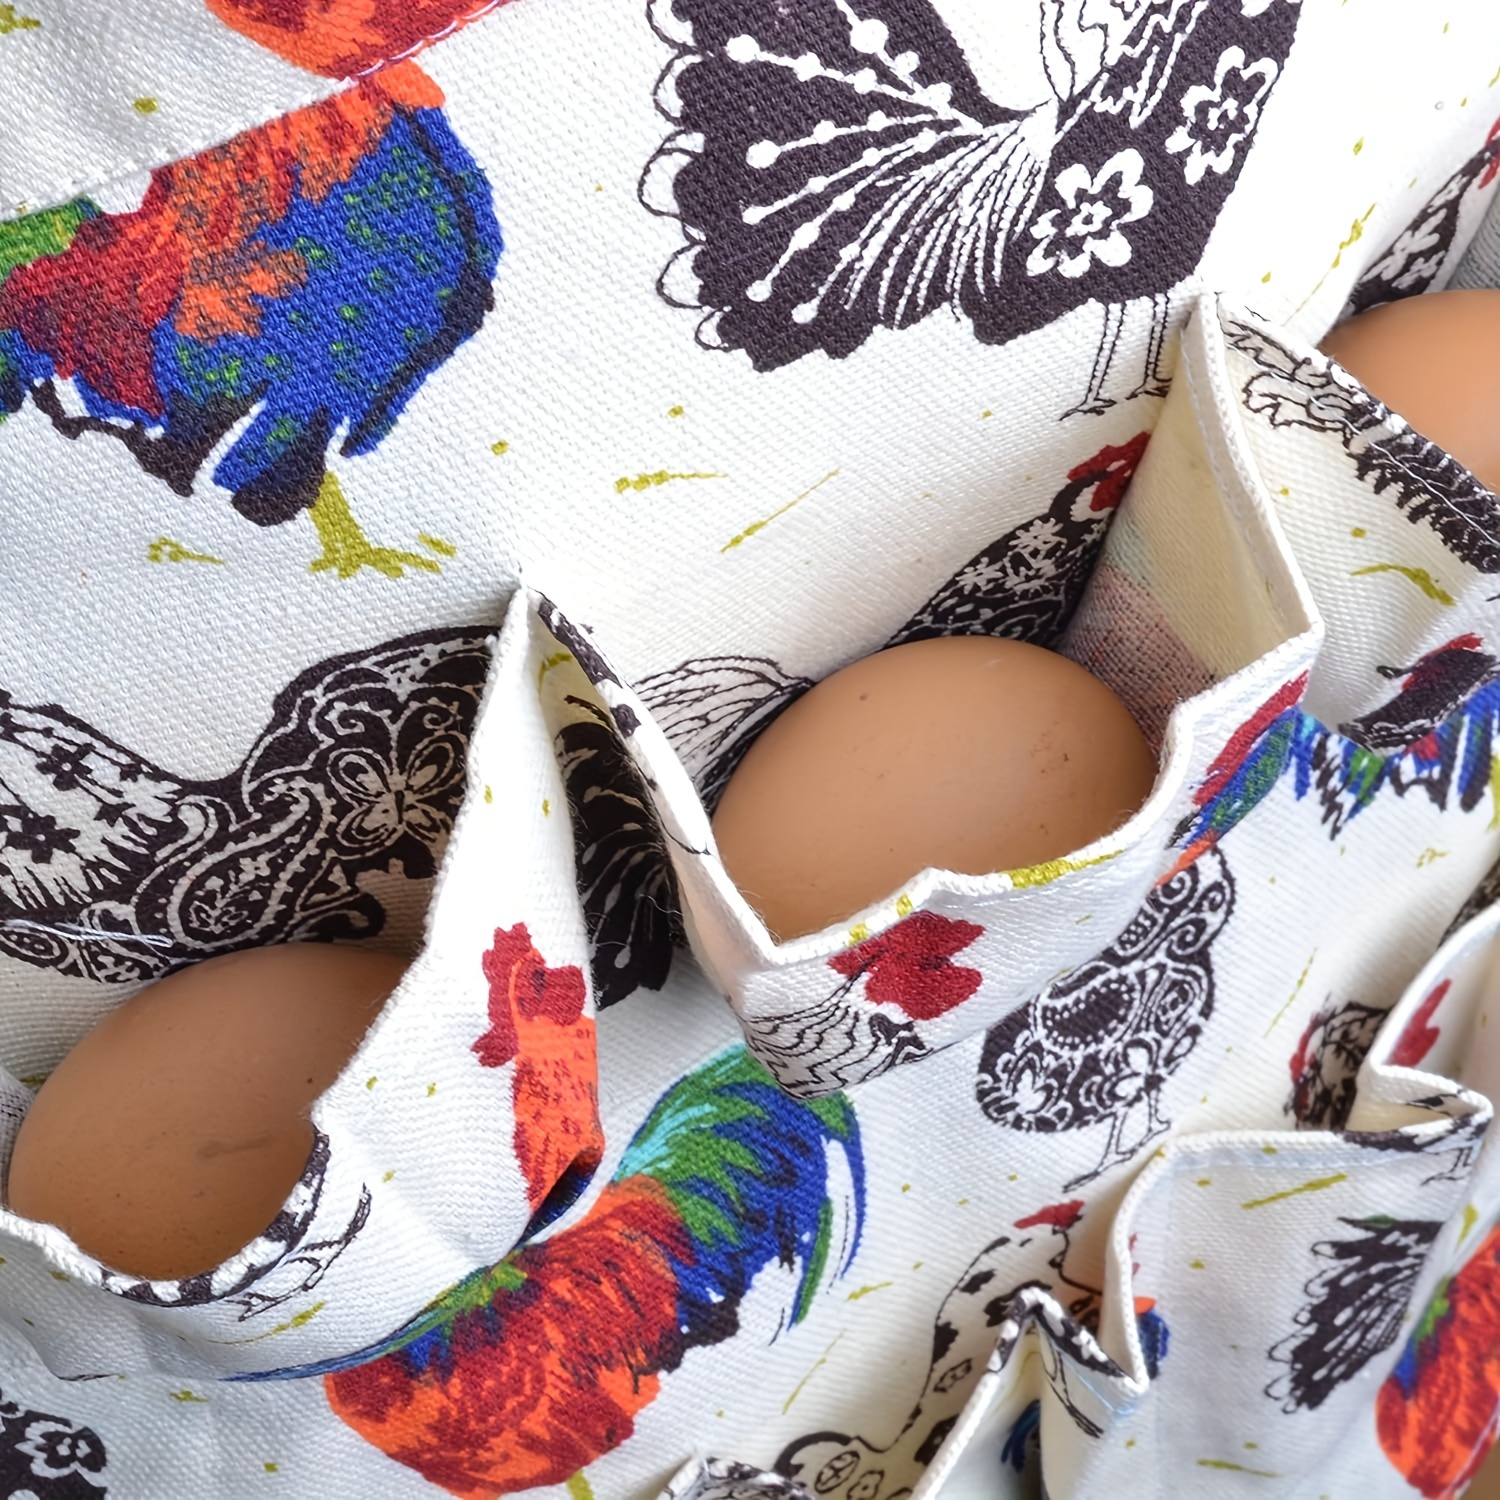 Norhogo Egg Apron Women Men With 12 Pockets, Funny Eggs Hold Collecting  Apron For Fresh Eggs Women Deep Pocket Holder For Collecting Hen Ducks  Goose